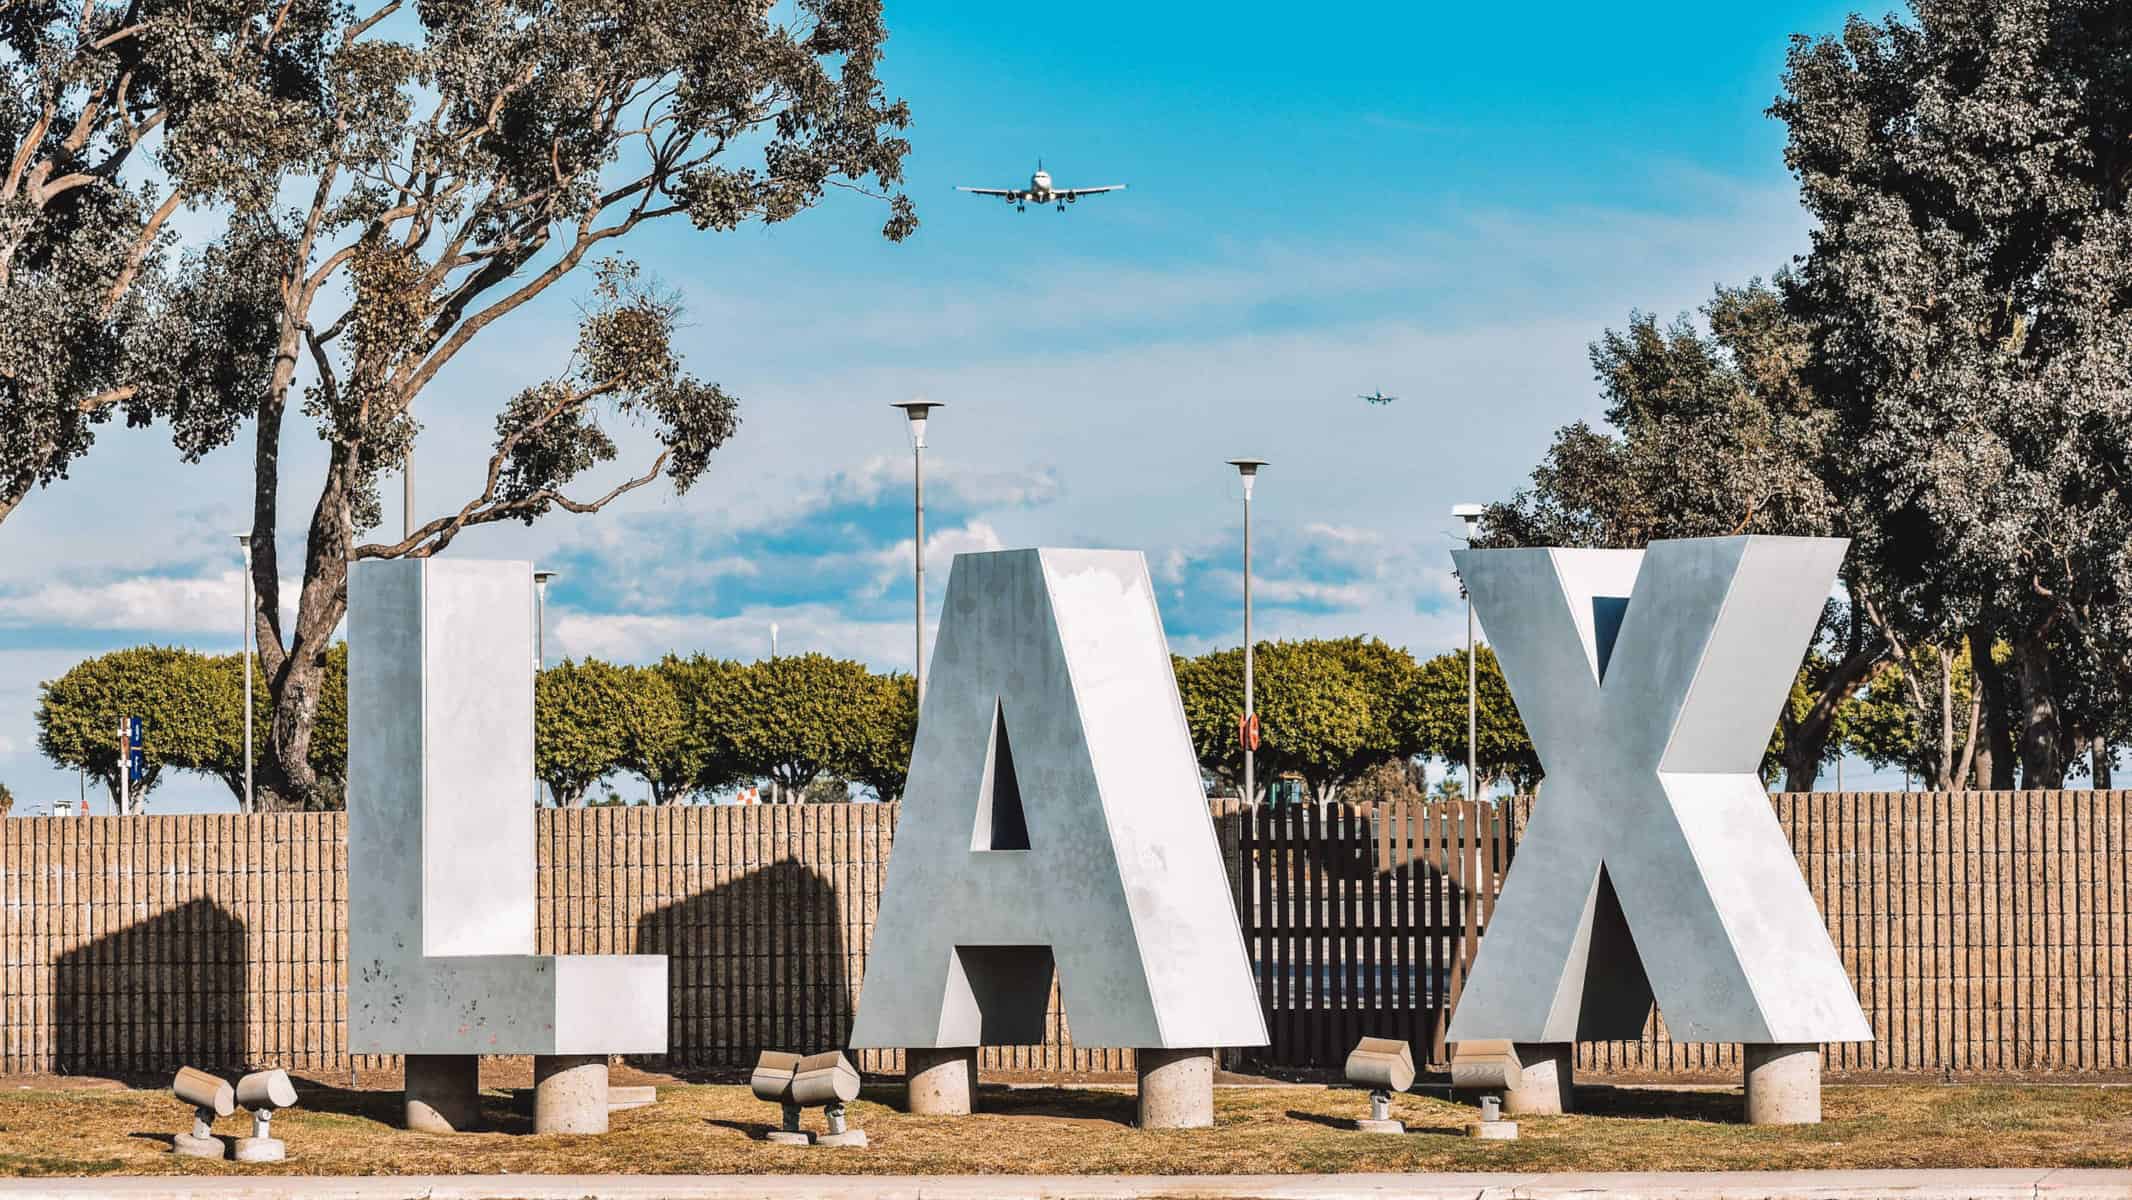 A shot of an aircraft taking off right over the LAX sign!